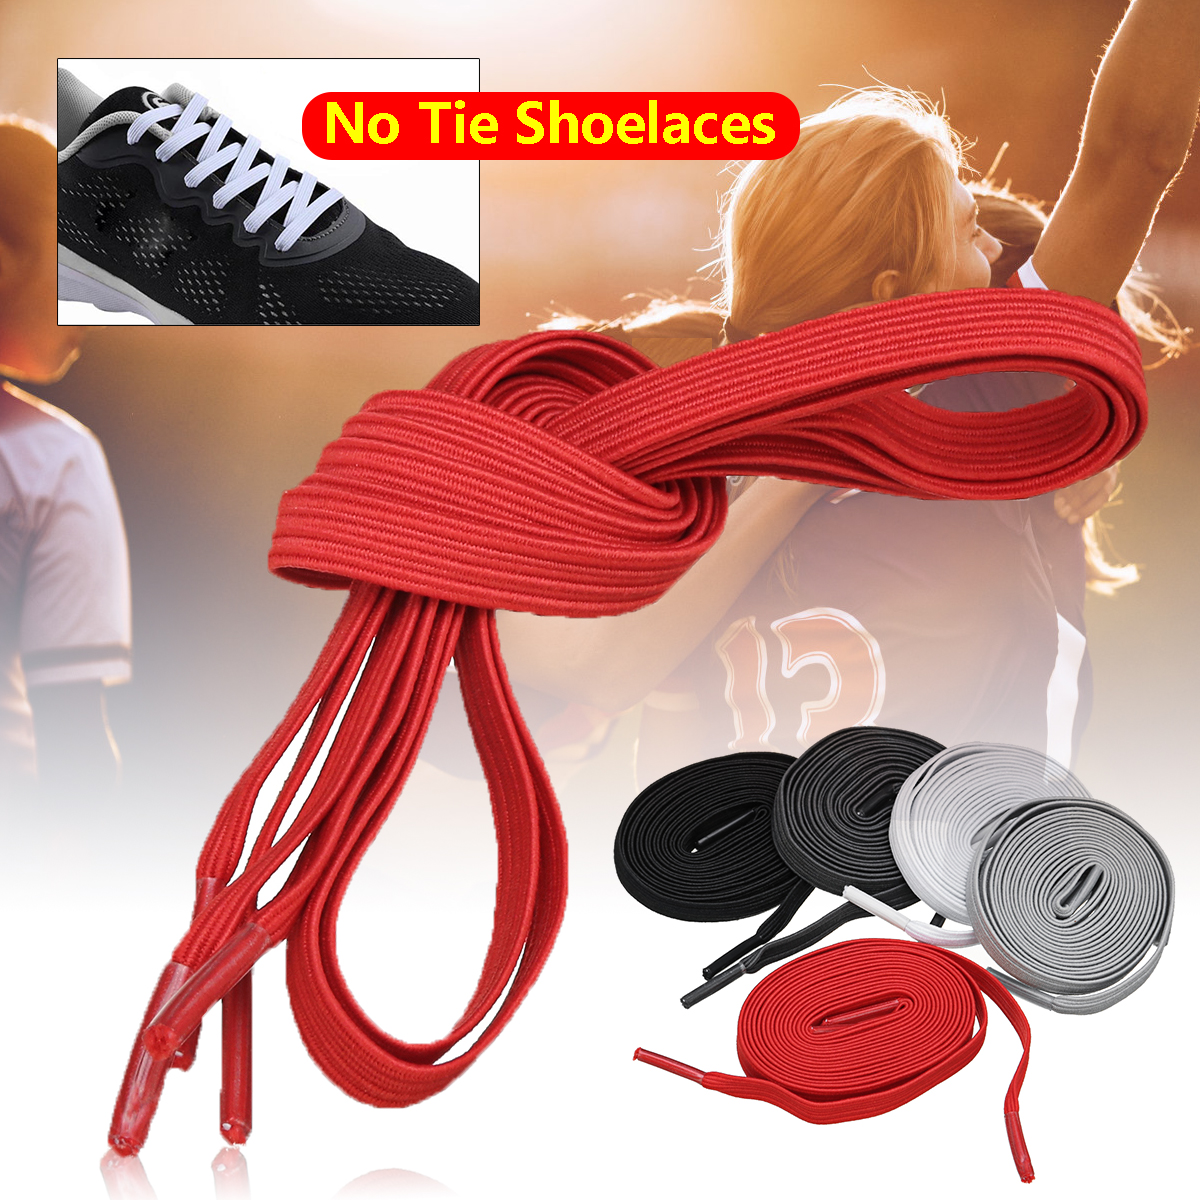 2Pcs-100cm-Elastic-No-Tie-Shoelaces-Lazy-Free-Tie-Sneaker-Laces-With-Buckles-Sports-Running-1470098-3